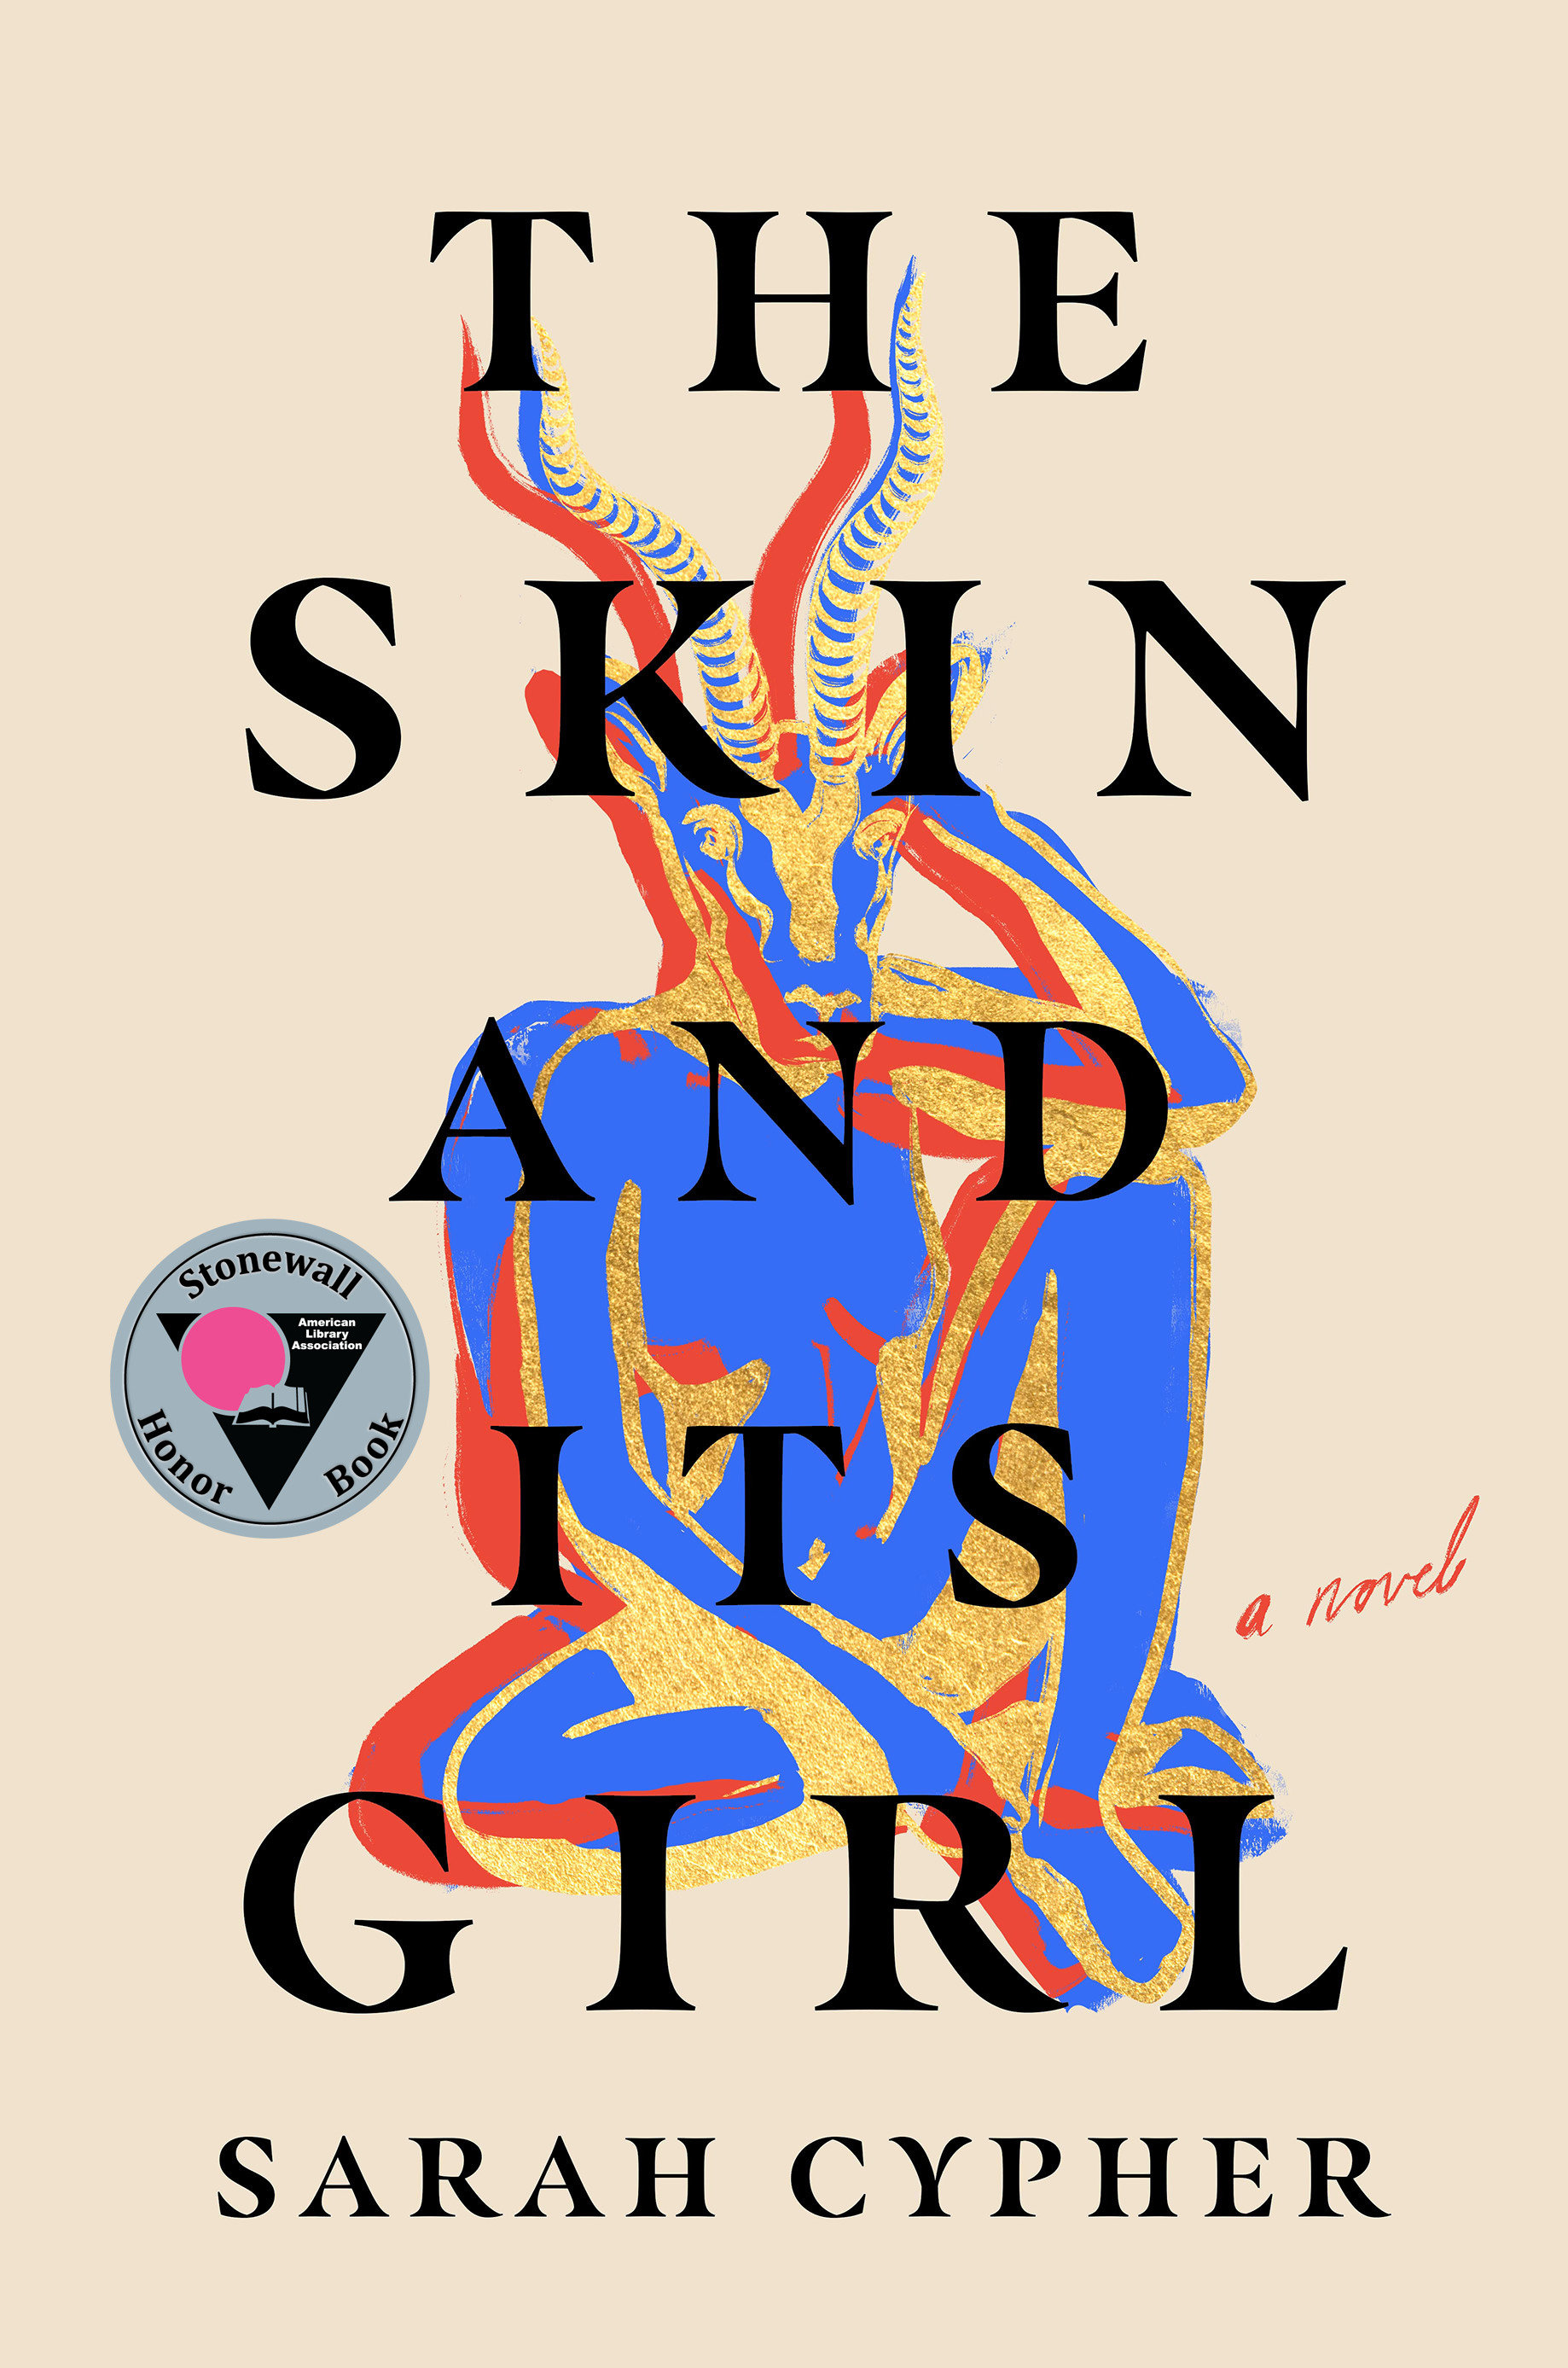 The Skin and Its Girl cover image